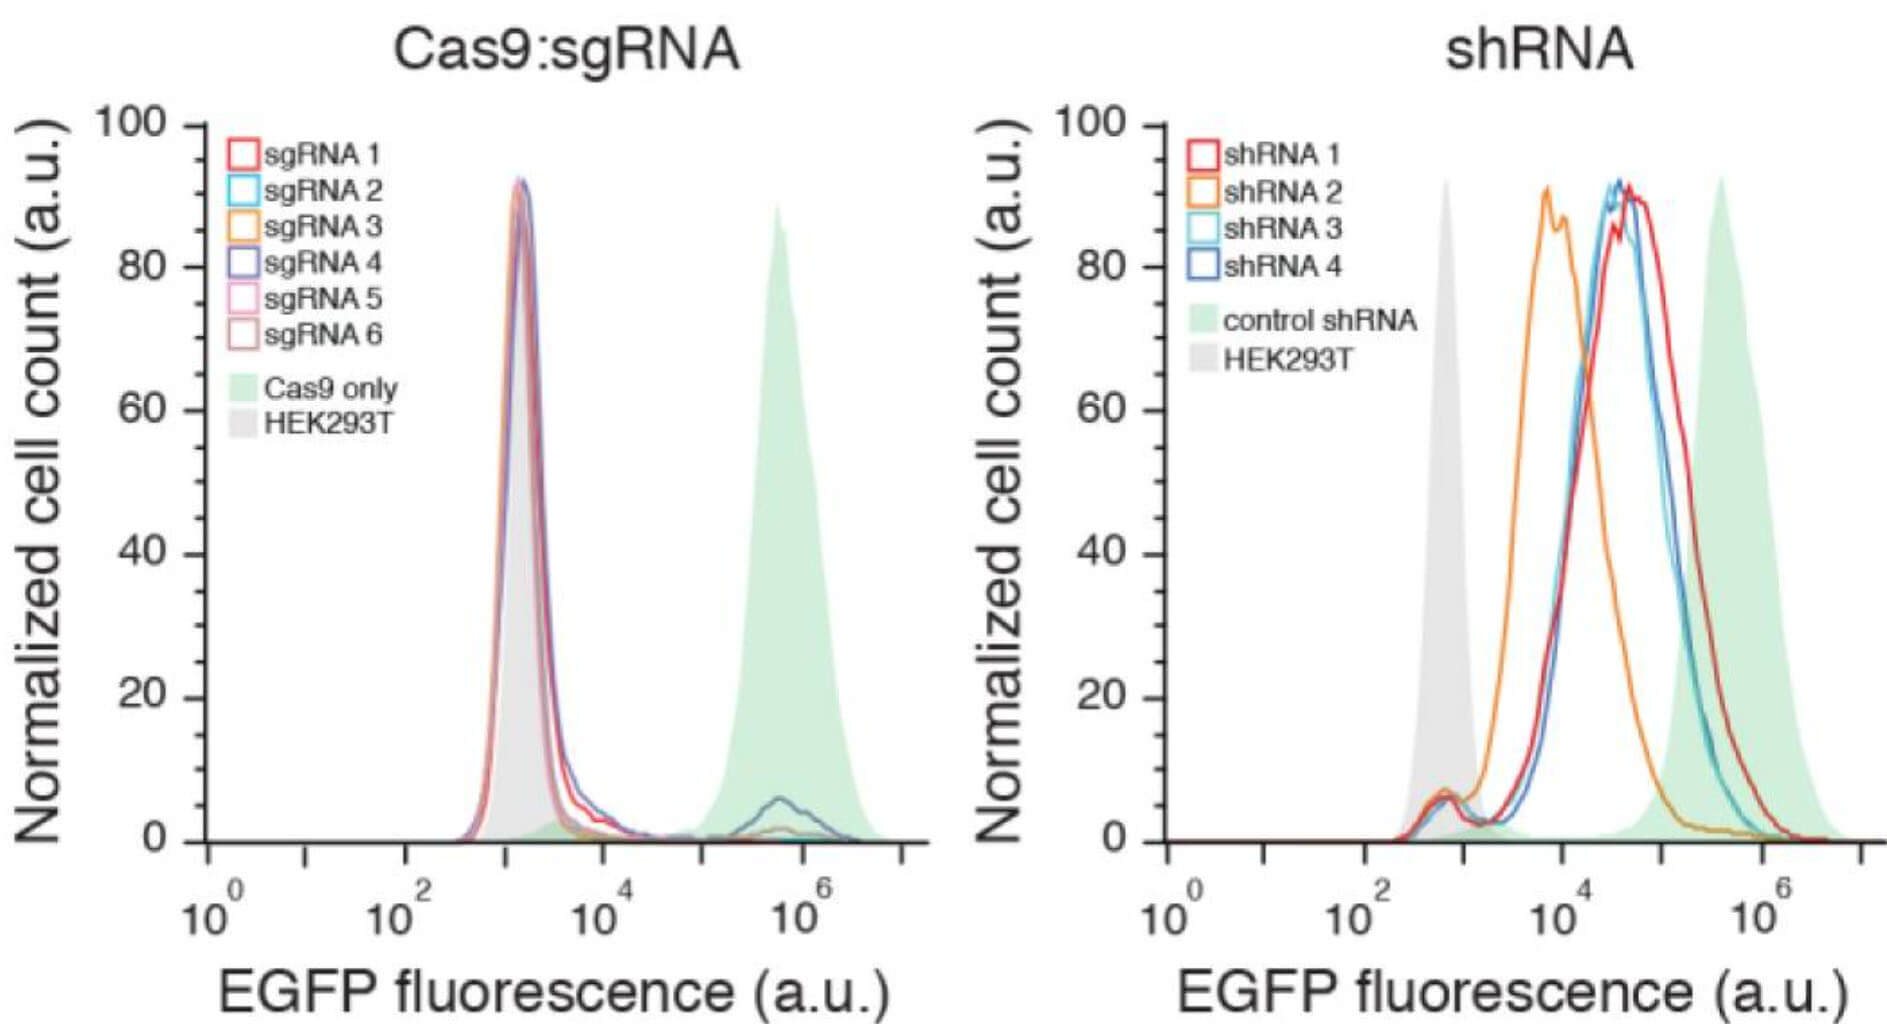  CRISPR/Cas knockout libraries are more stable than shRNA libraries 